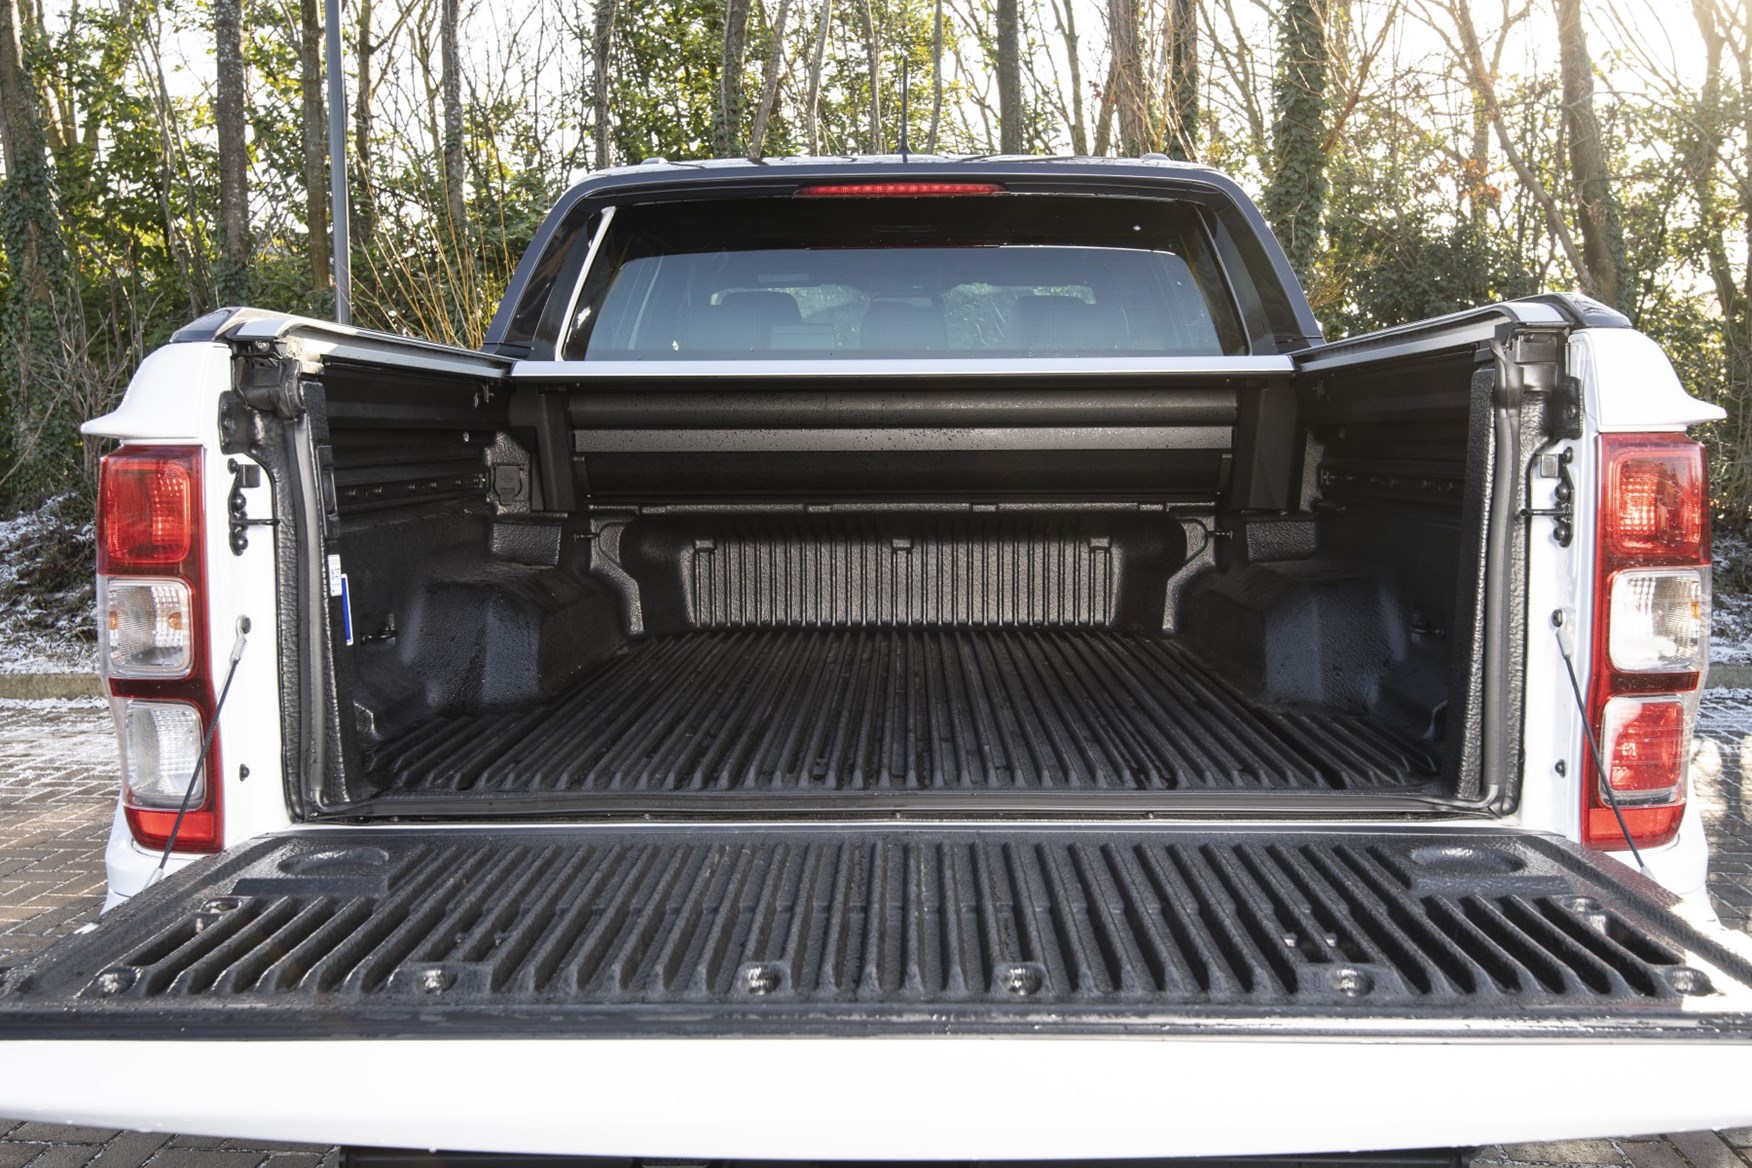 MS-RT Ford Ranger - load bed